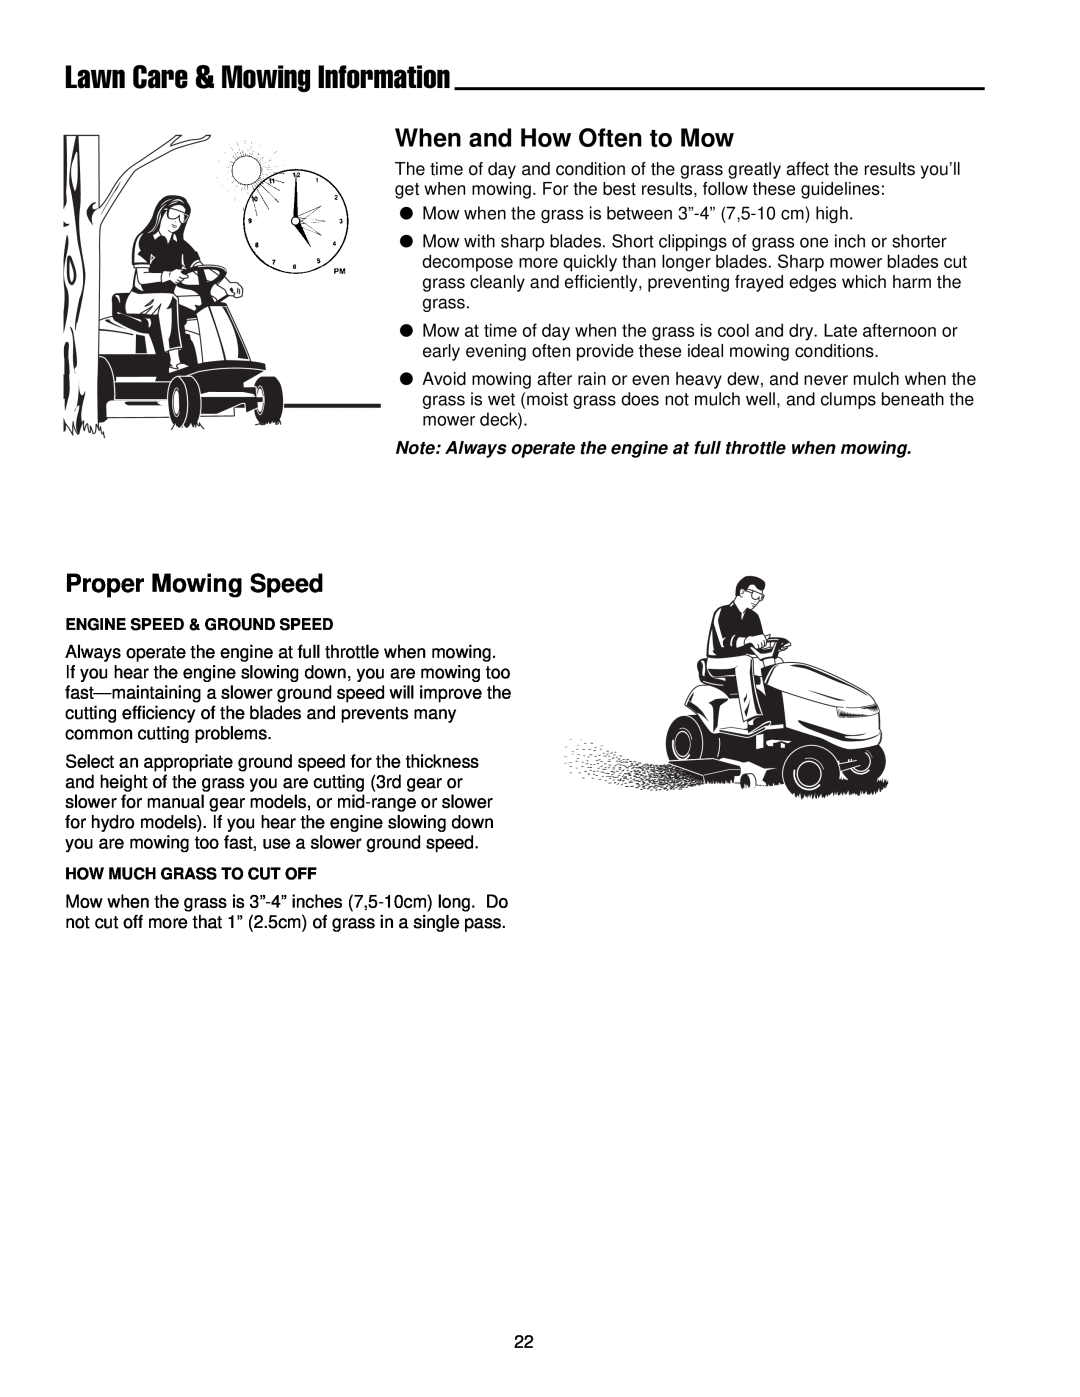 Simplicity 300 Series manual Lawn Care & Mowing Information, When and How Often to Mow, Proper Mowing Speed 